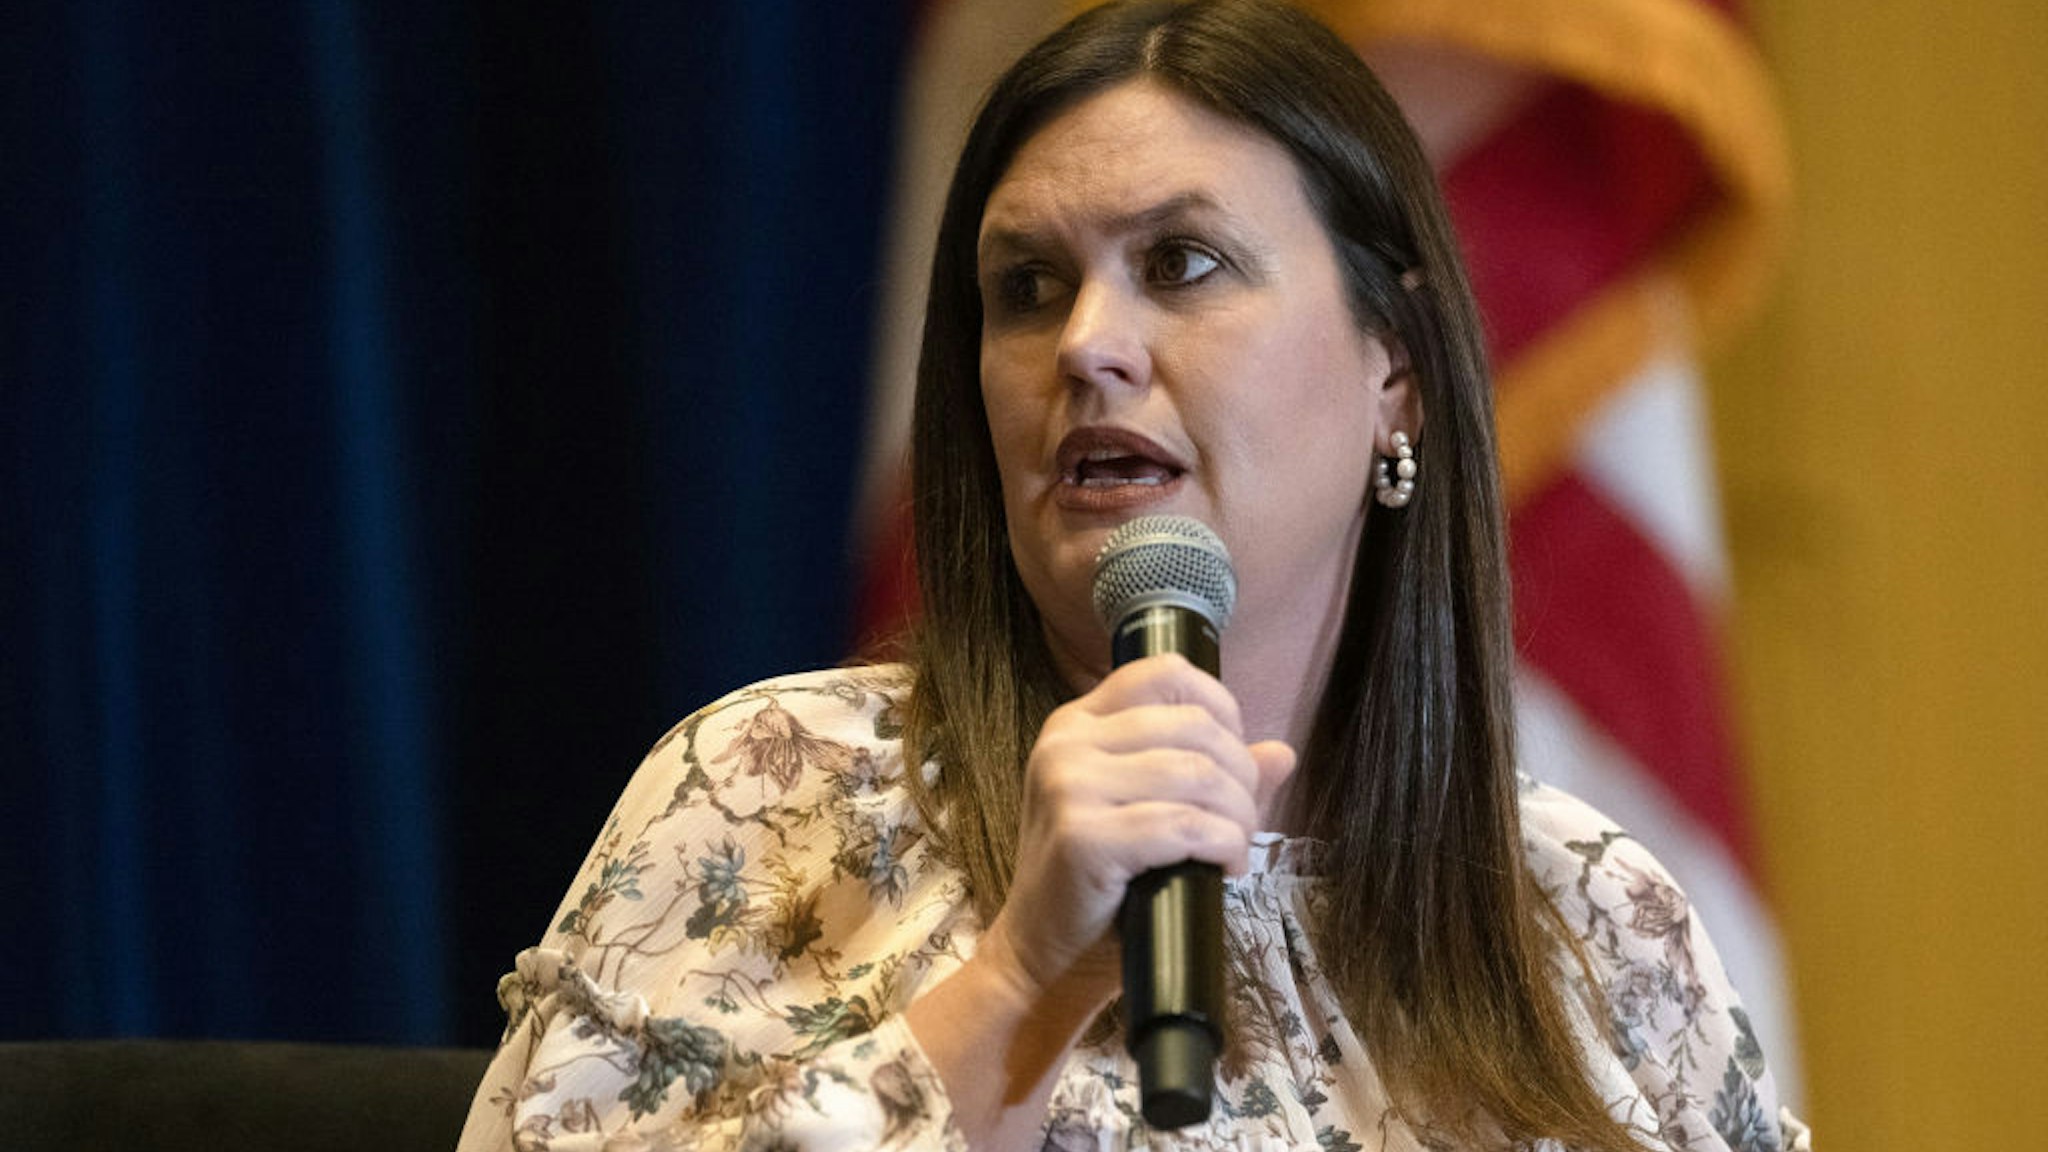 Sarah Huckabee Sanders cruised to victory in the Republican primary for Arkansas governor and is on pace to win the office her father, Mike Huckabee, held from 1996-2007.